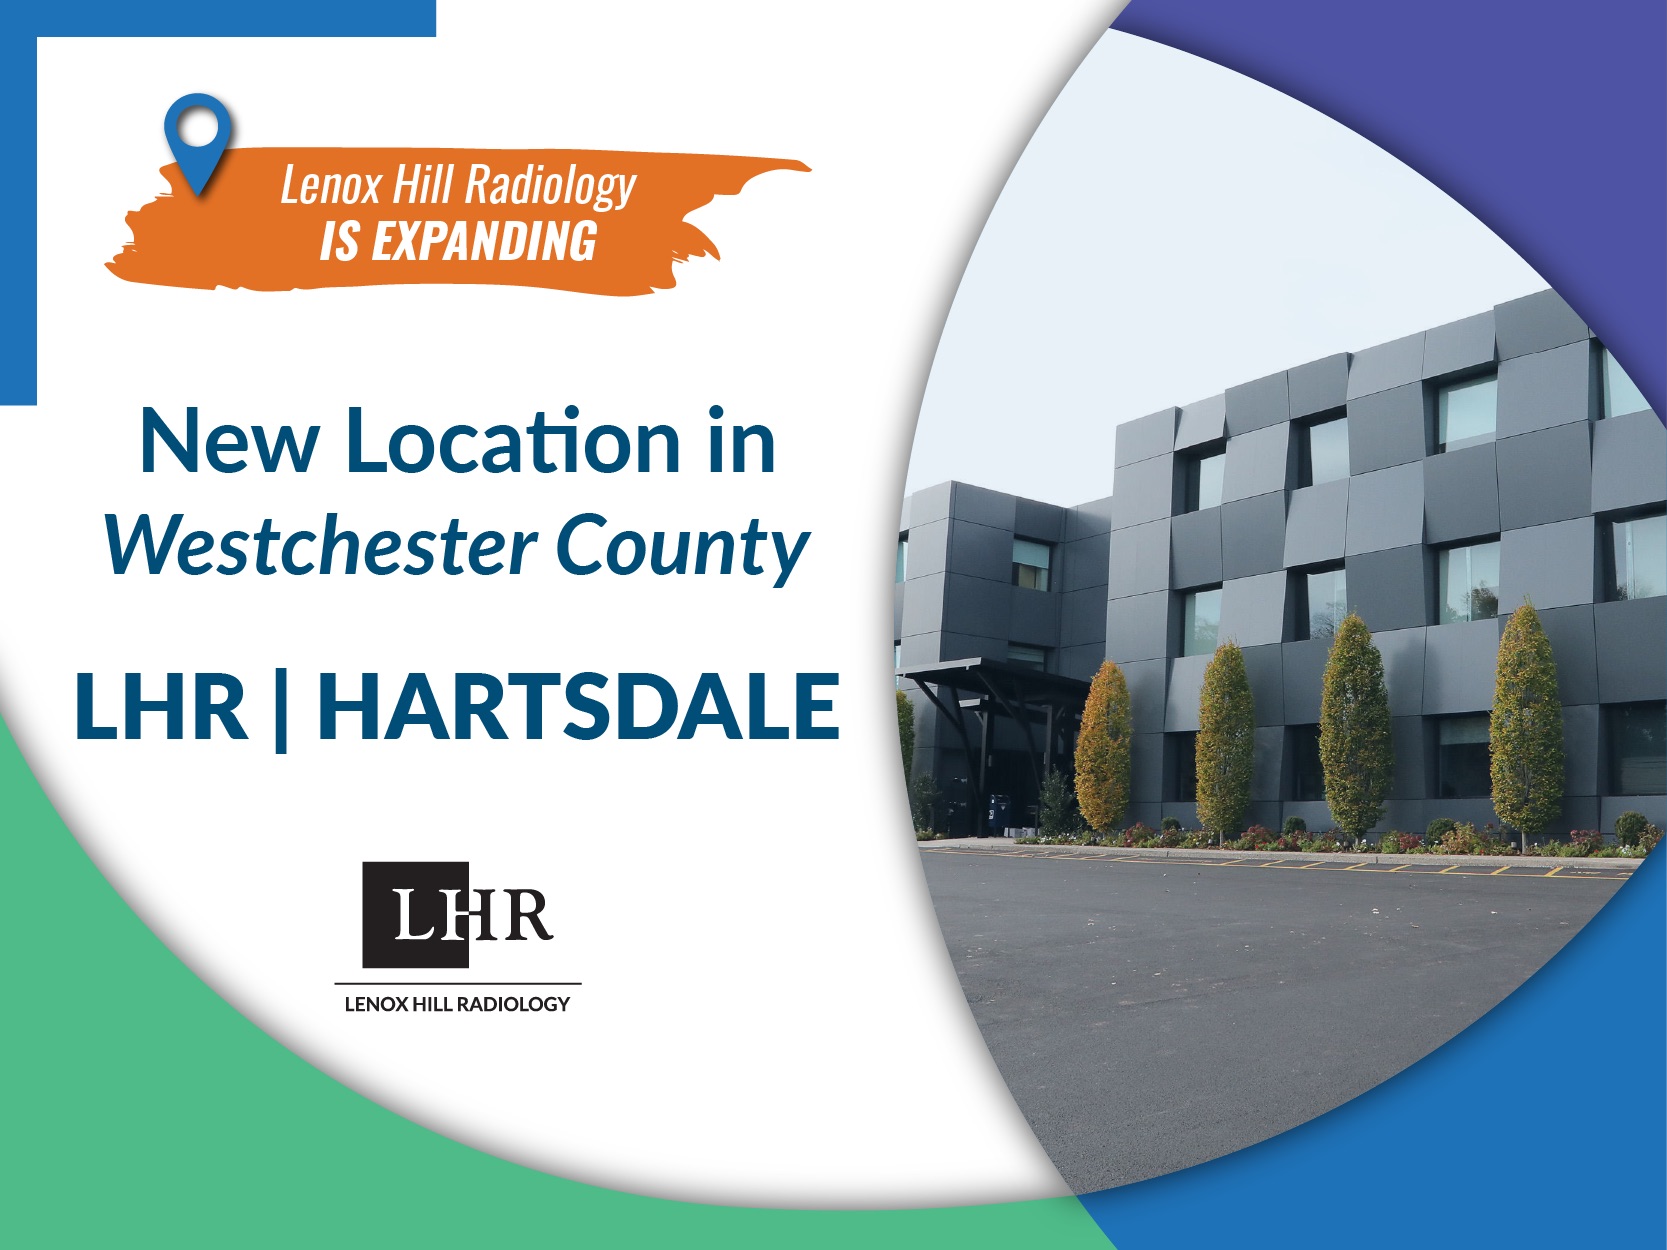 New Westchester location: Lenox Hill Radiology Hartsdale